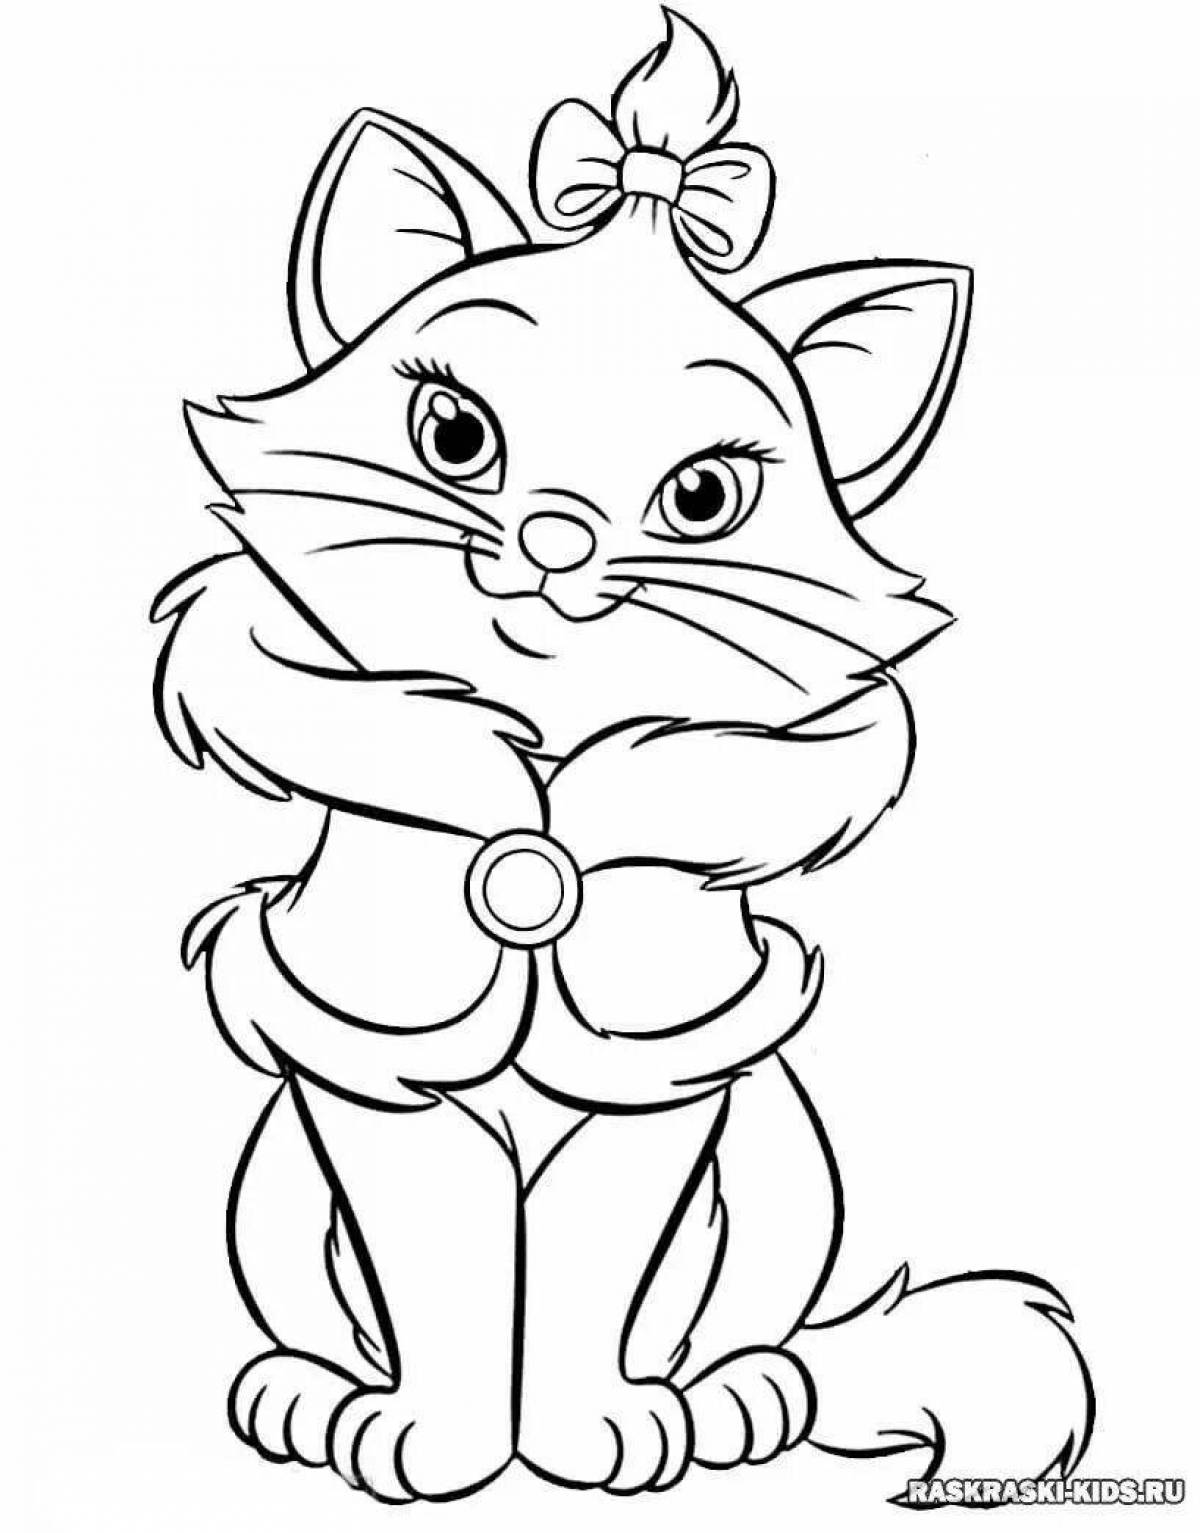 Coloring page giggly kittens for children 6-7 years old